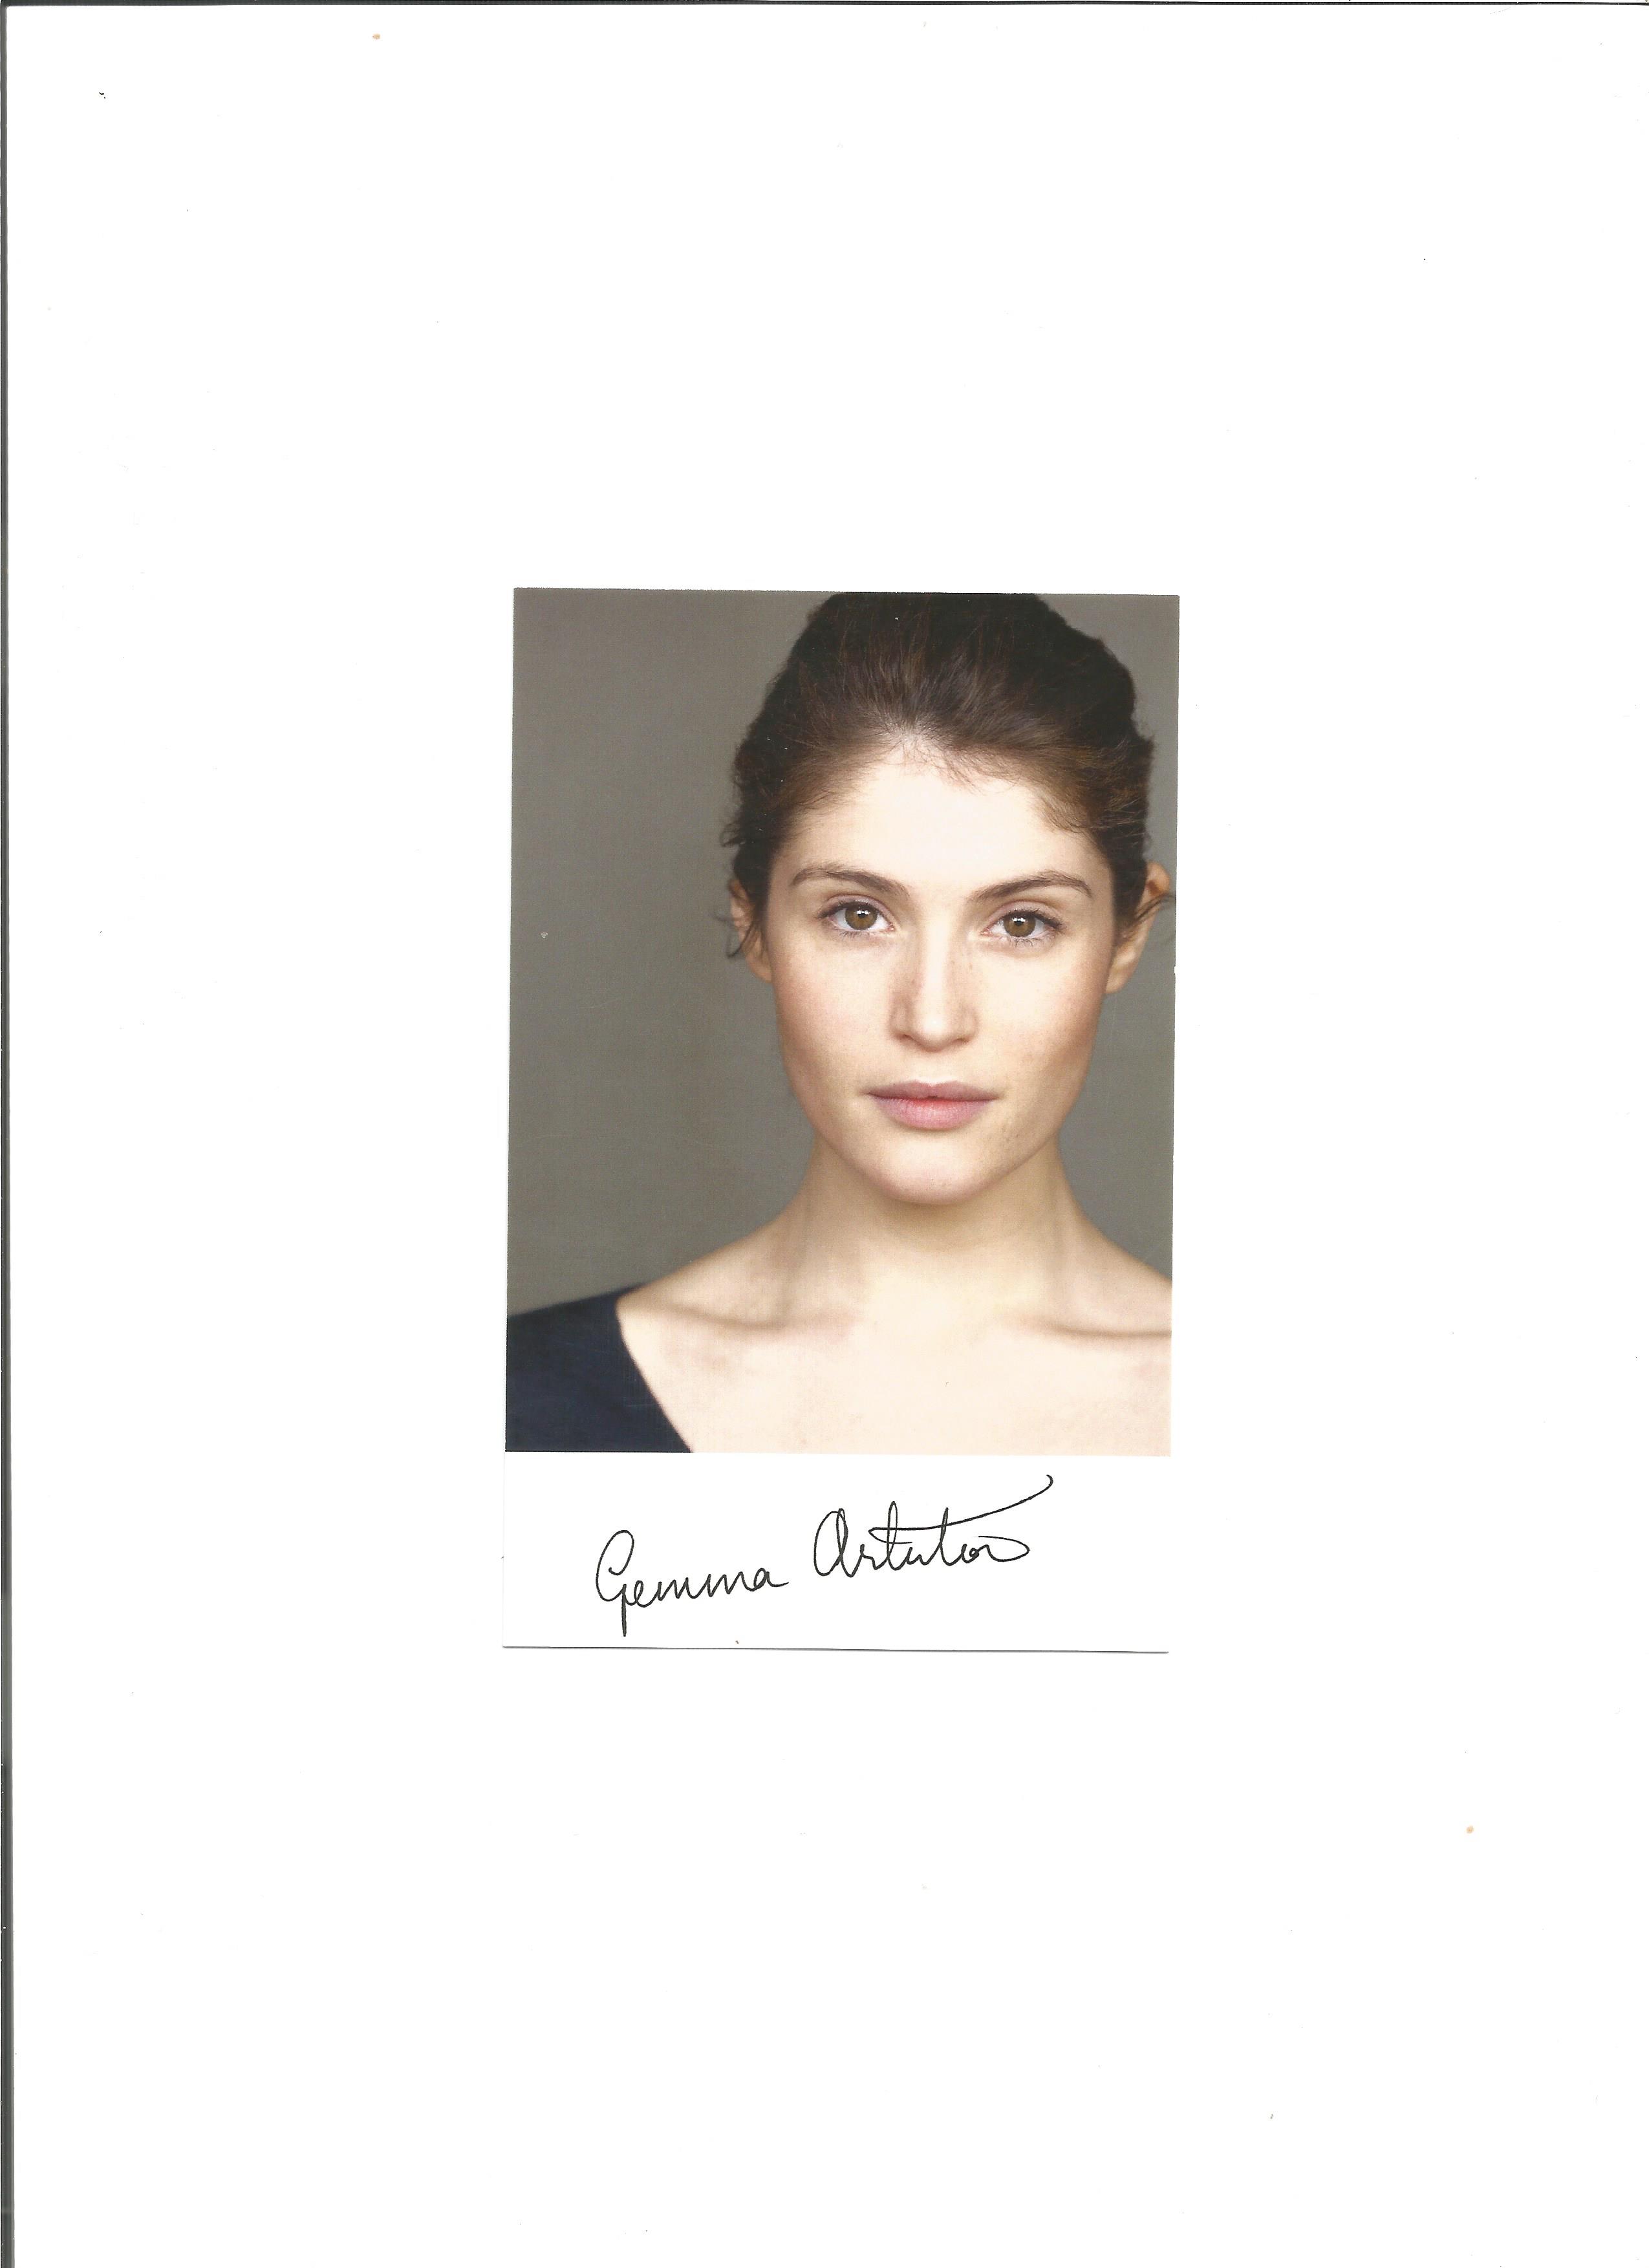 Gemma Arterton Bond Actress Signed Photo. Good Condition. All signed pieces come with a